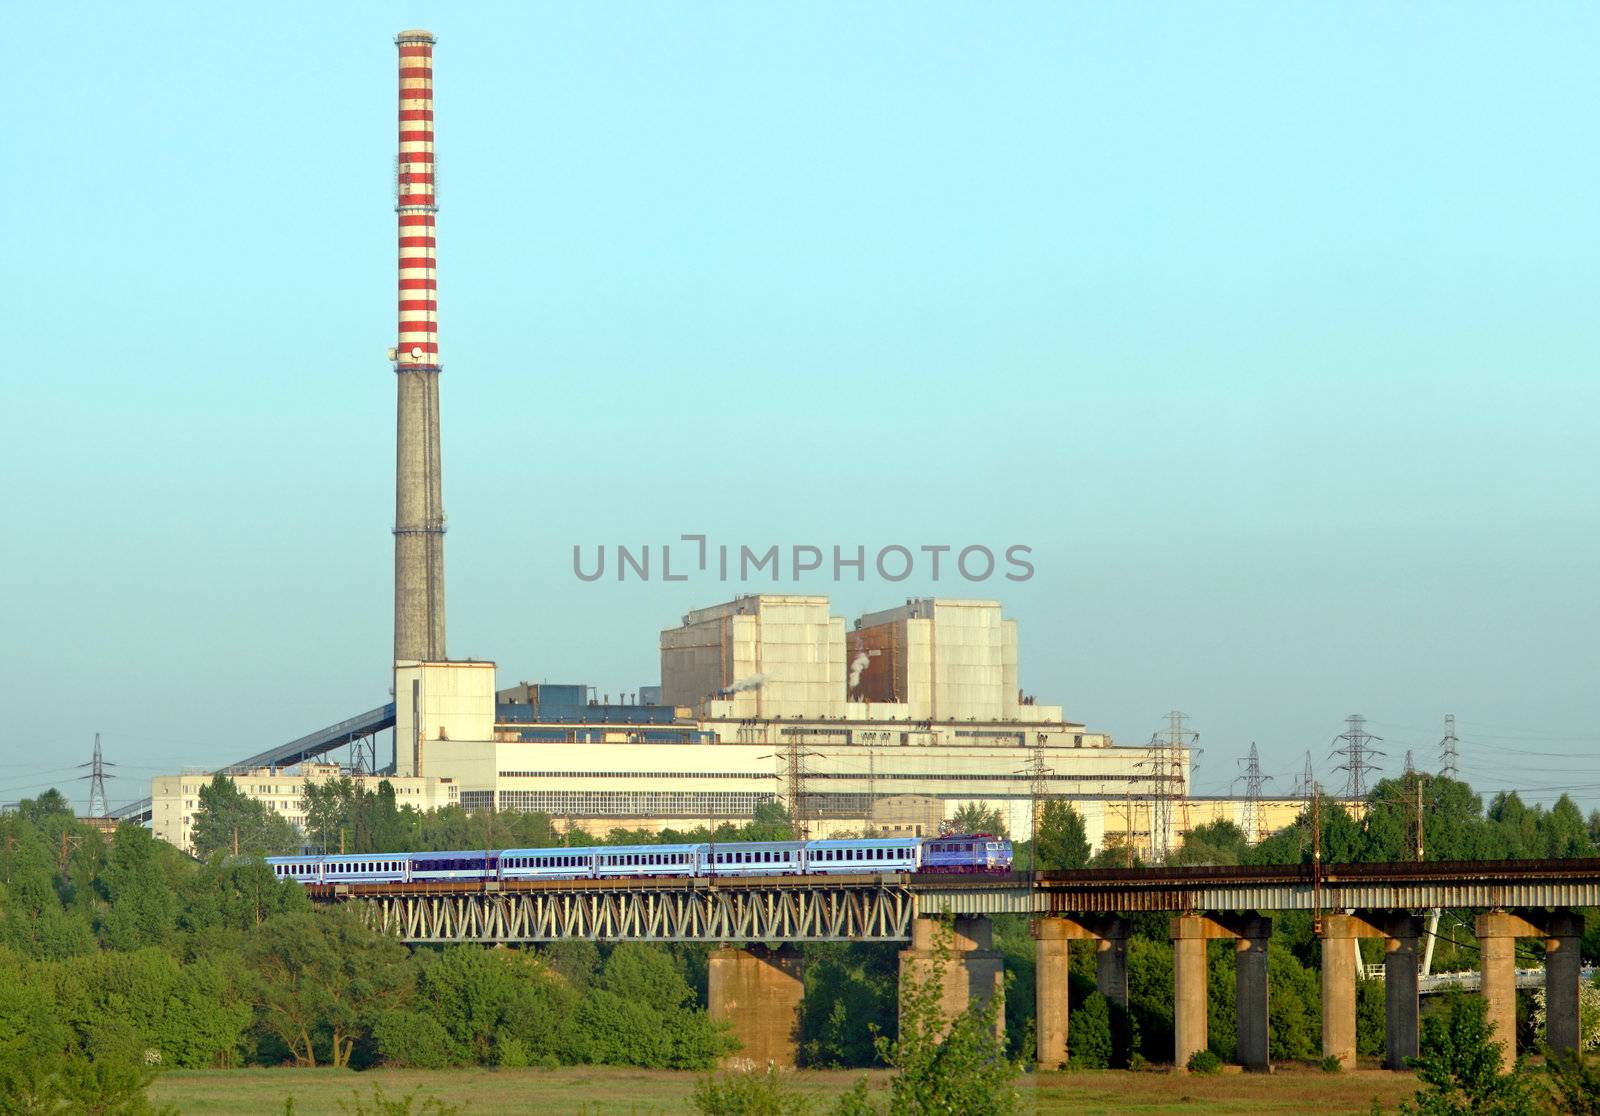 Industrial landscape with a intercity train and power plant
